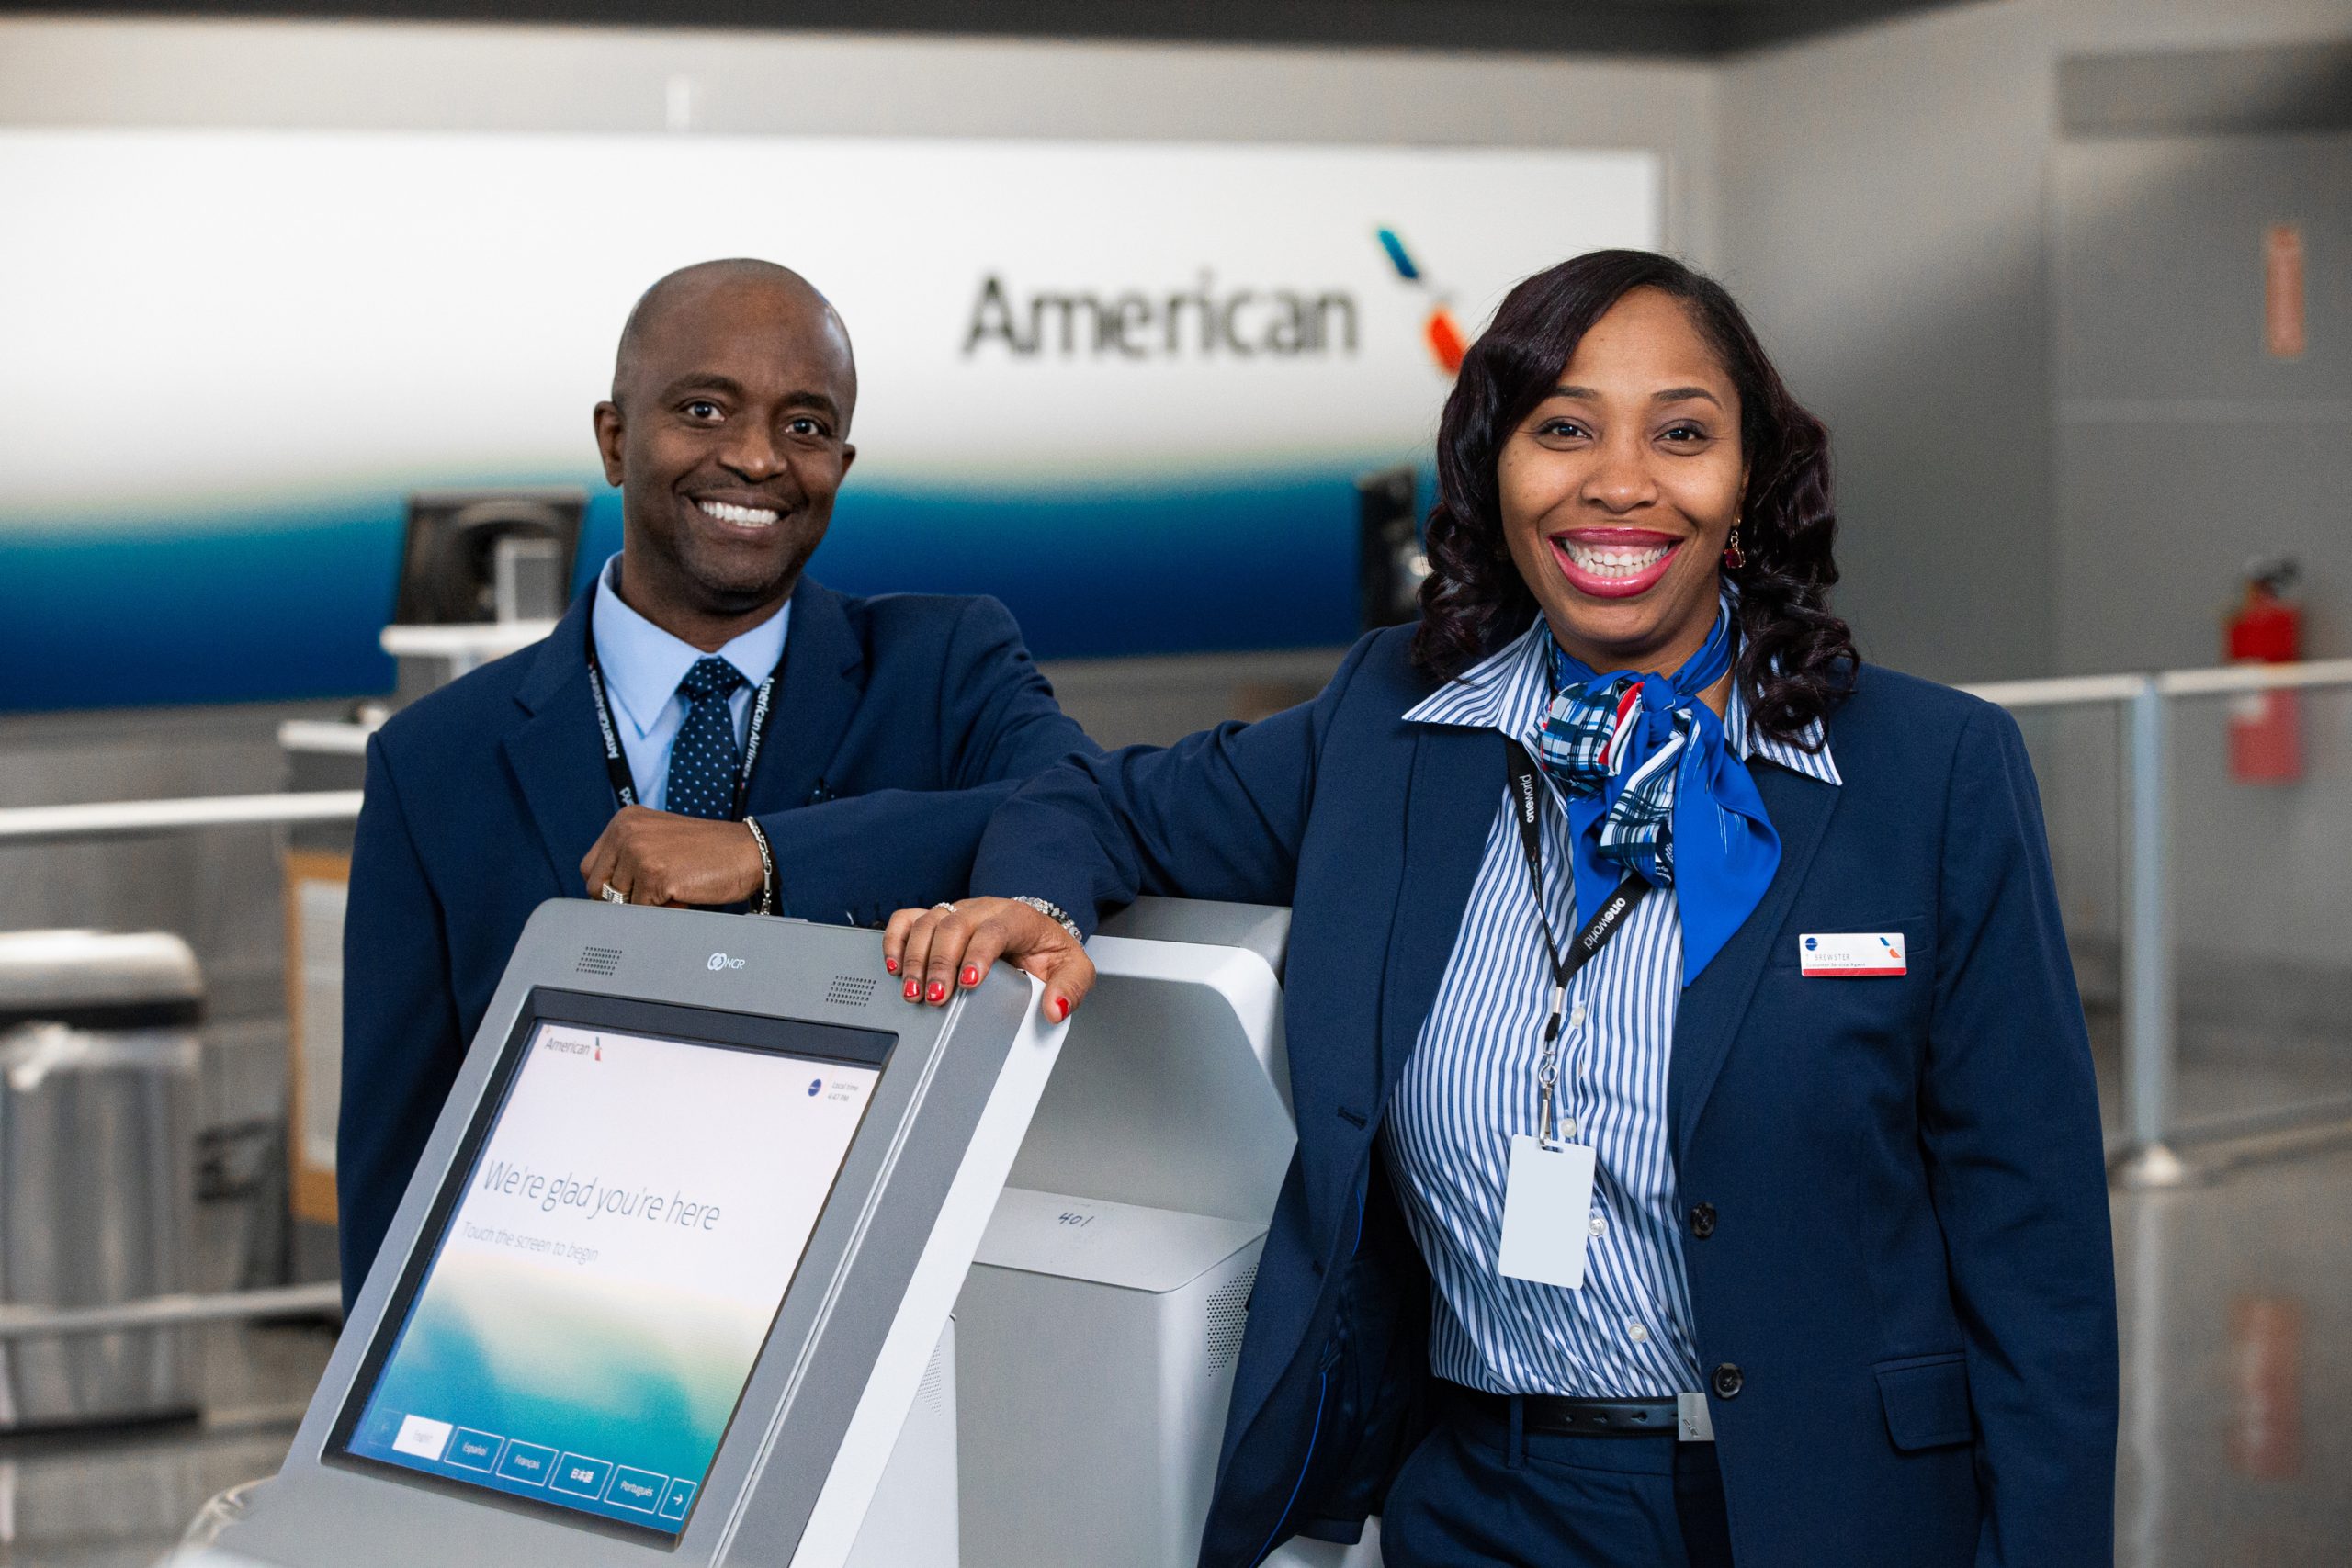 American Airlines at check in kiosks